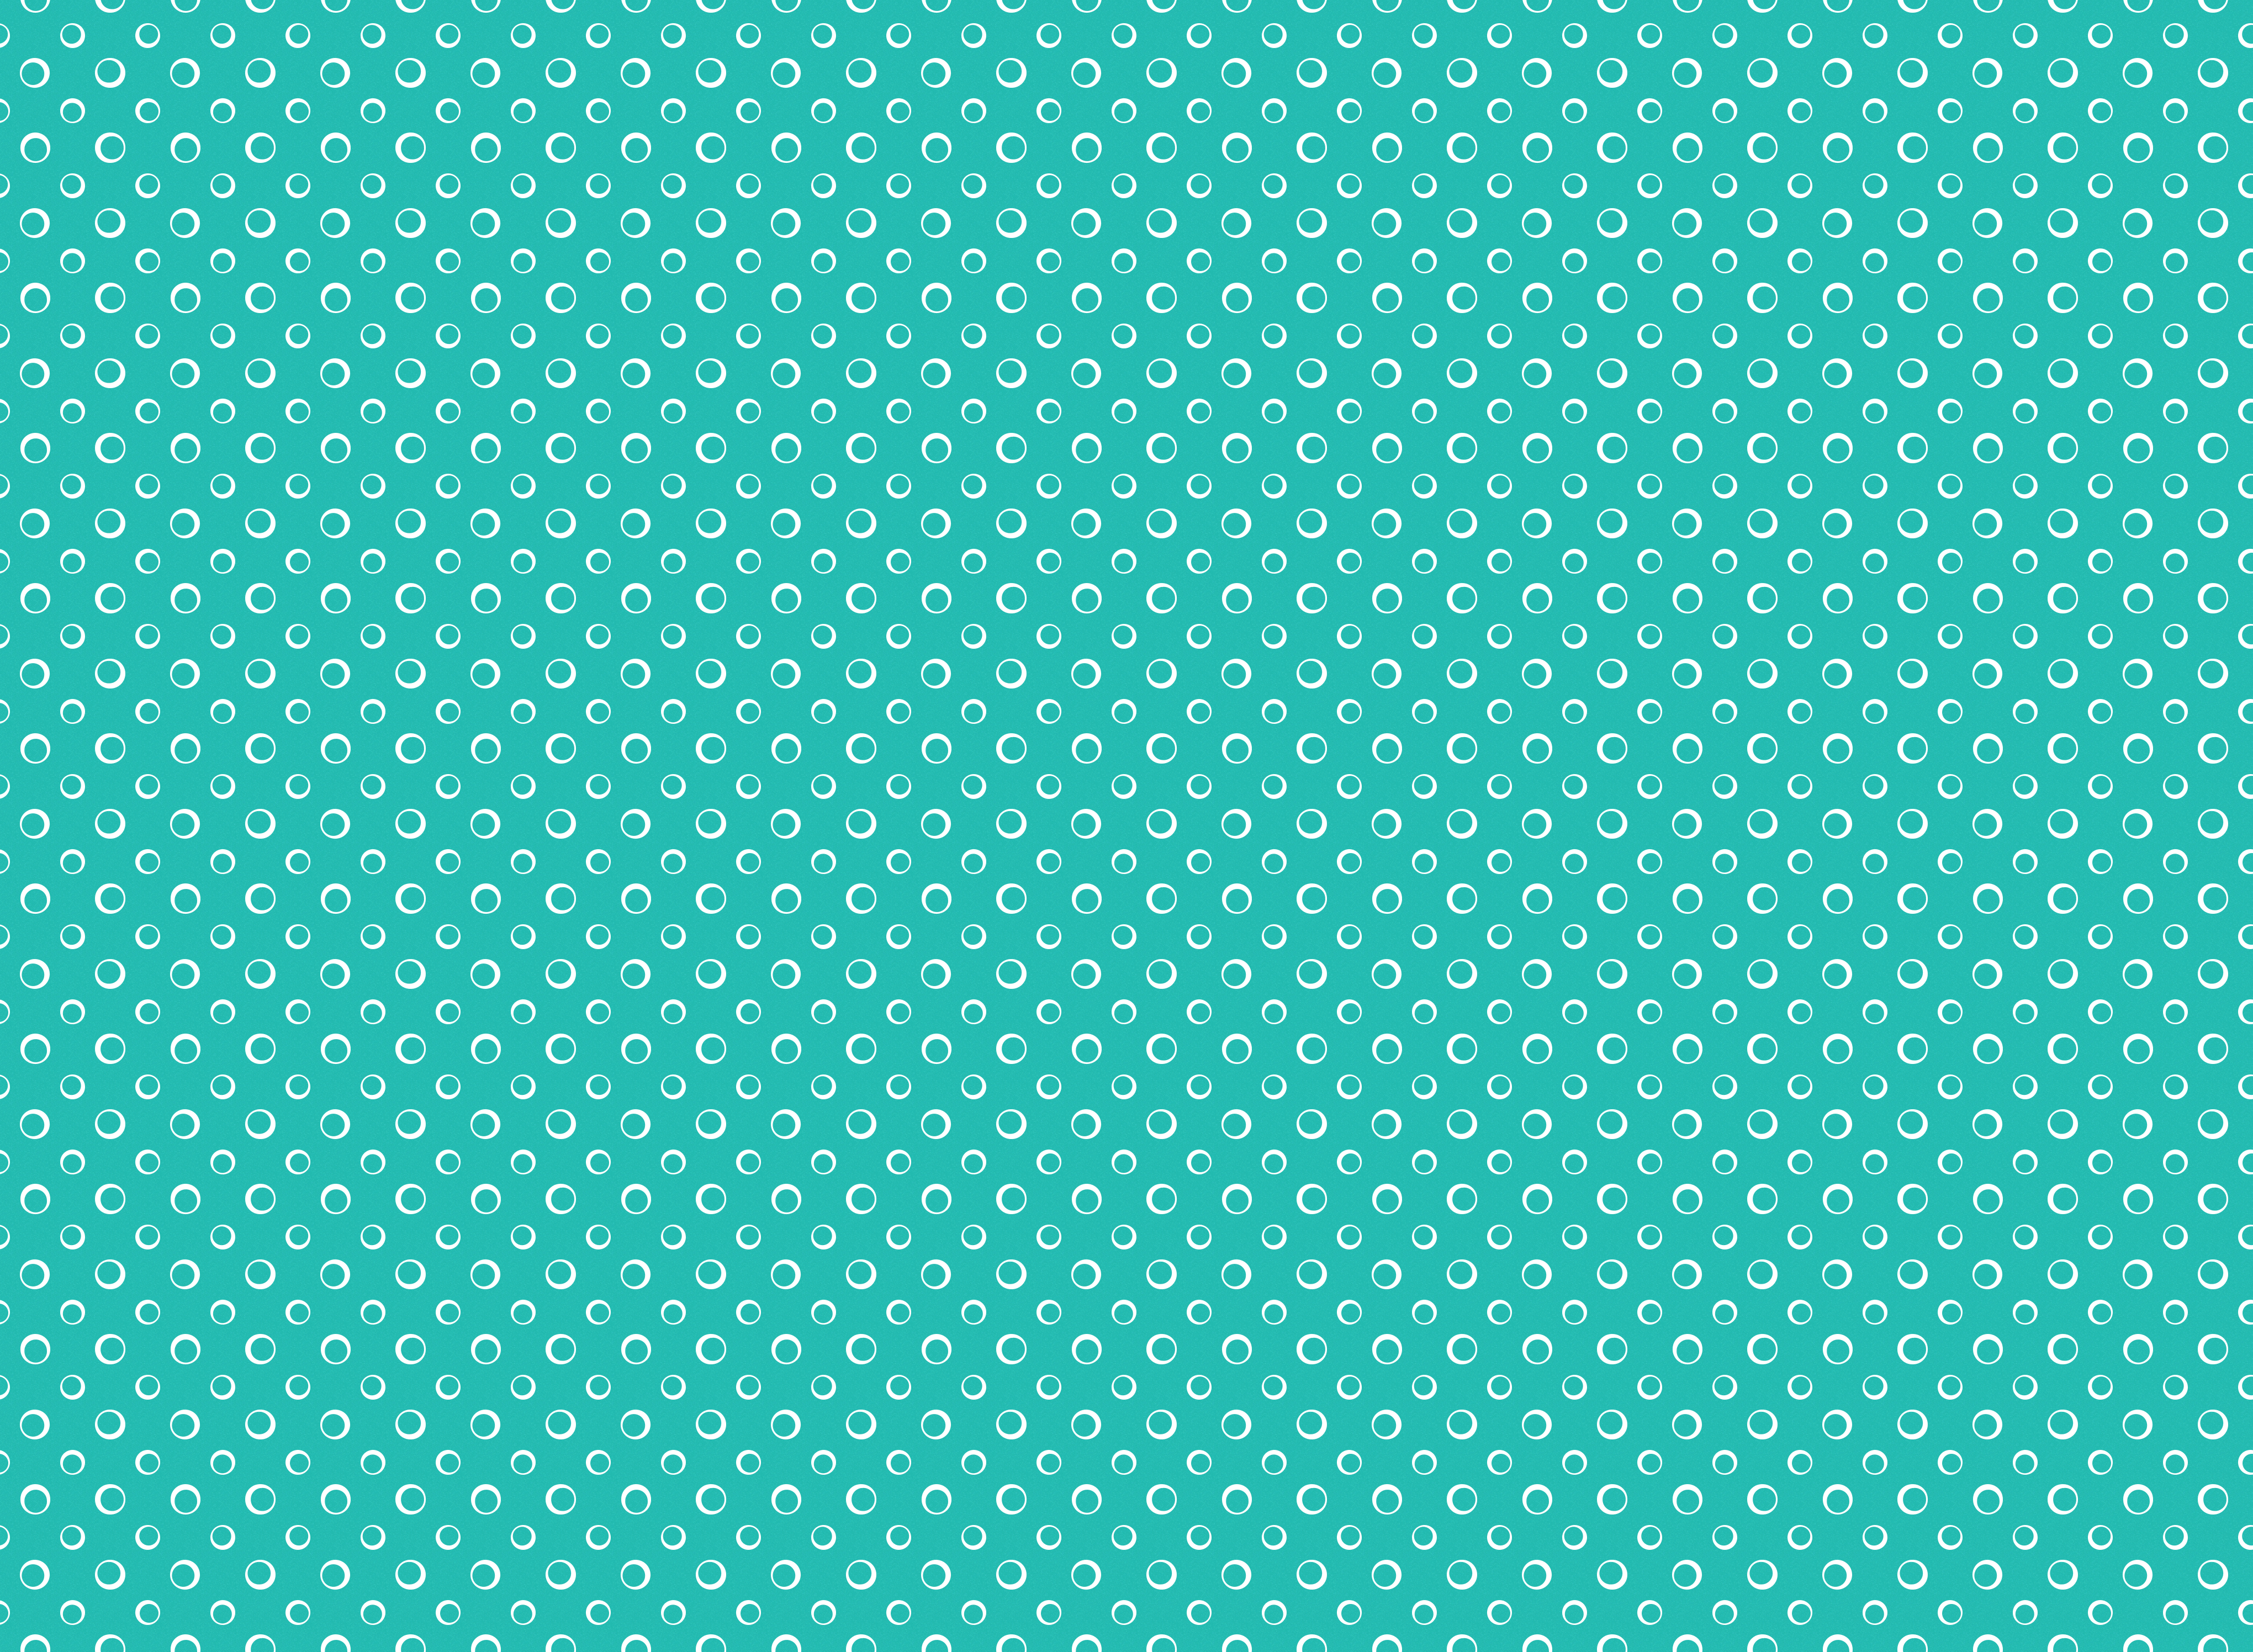 Turquoise Rings Pattern  PSDGraphics Wallpaper